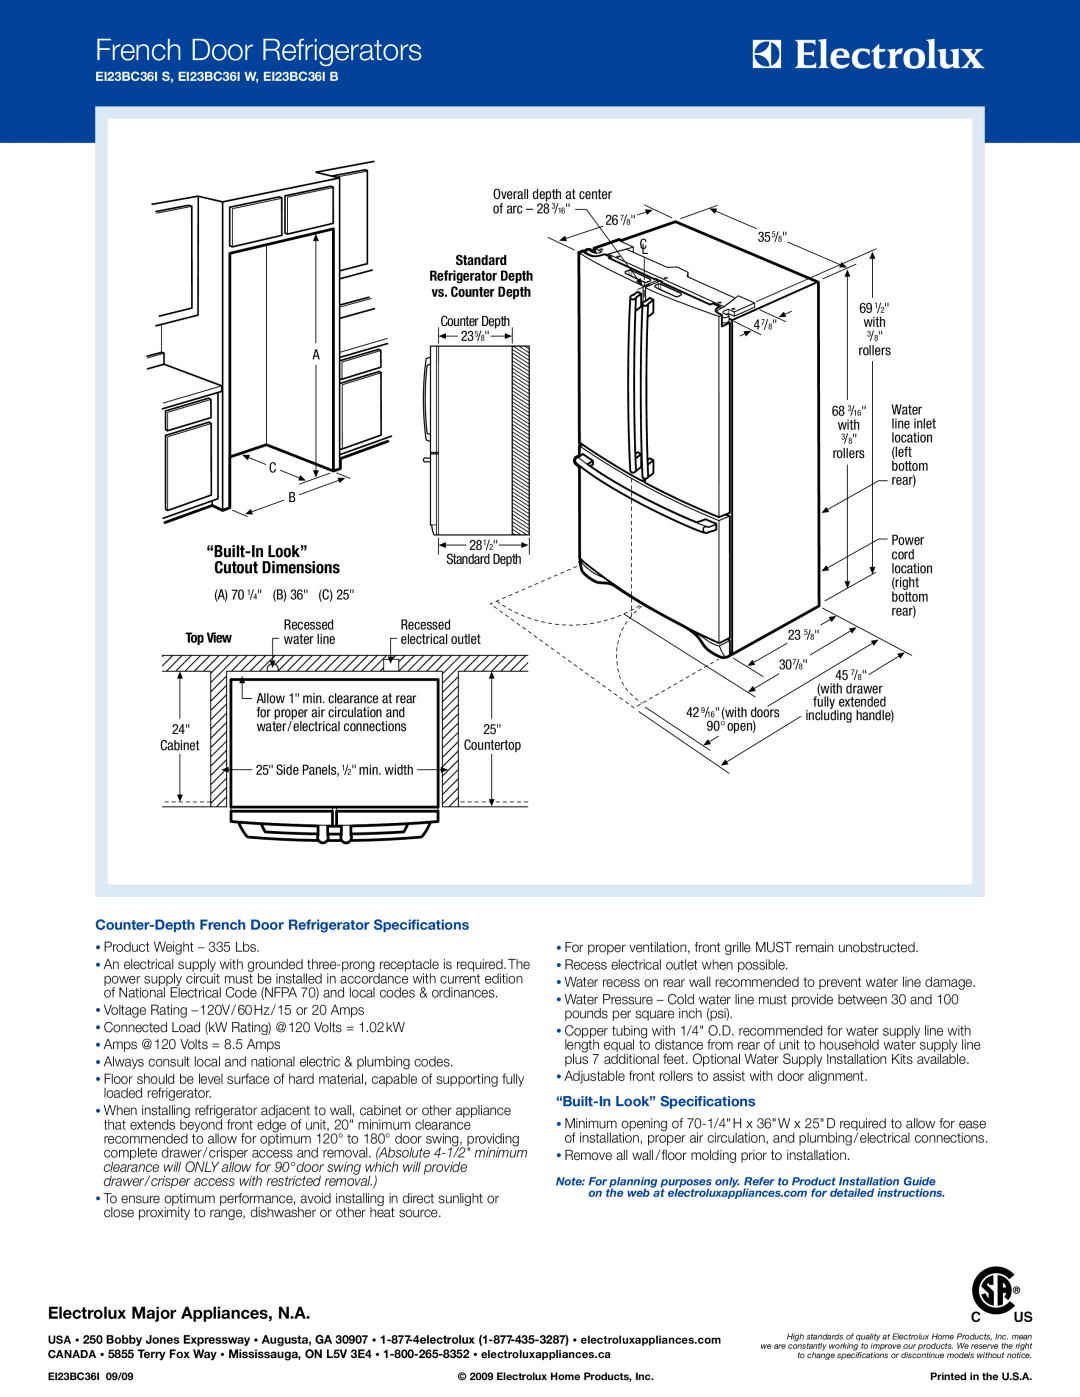 Electrolux EI23BC36IW Counter-Depth French Door Refrigerator Specifications, “Built-In Look” Specifications, Top View 